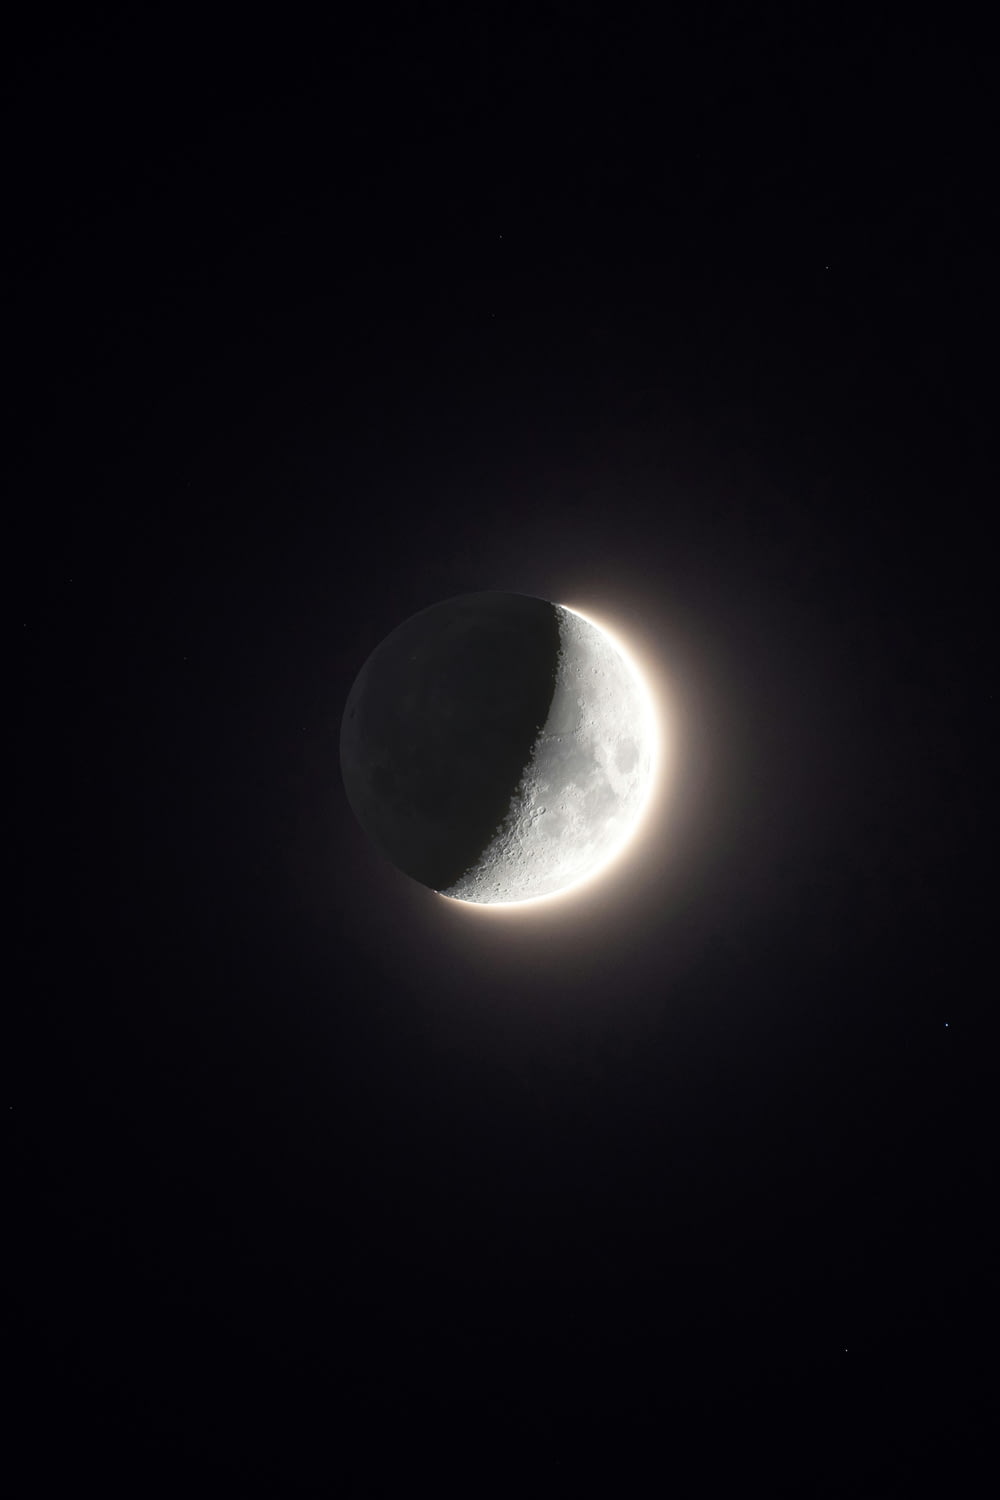 the moon is seen in front of a black background